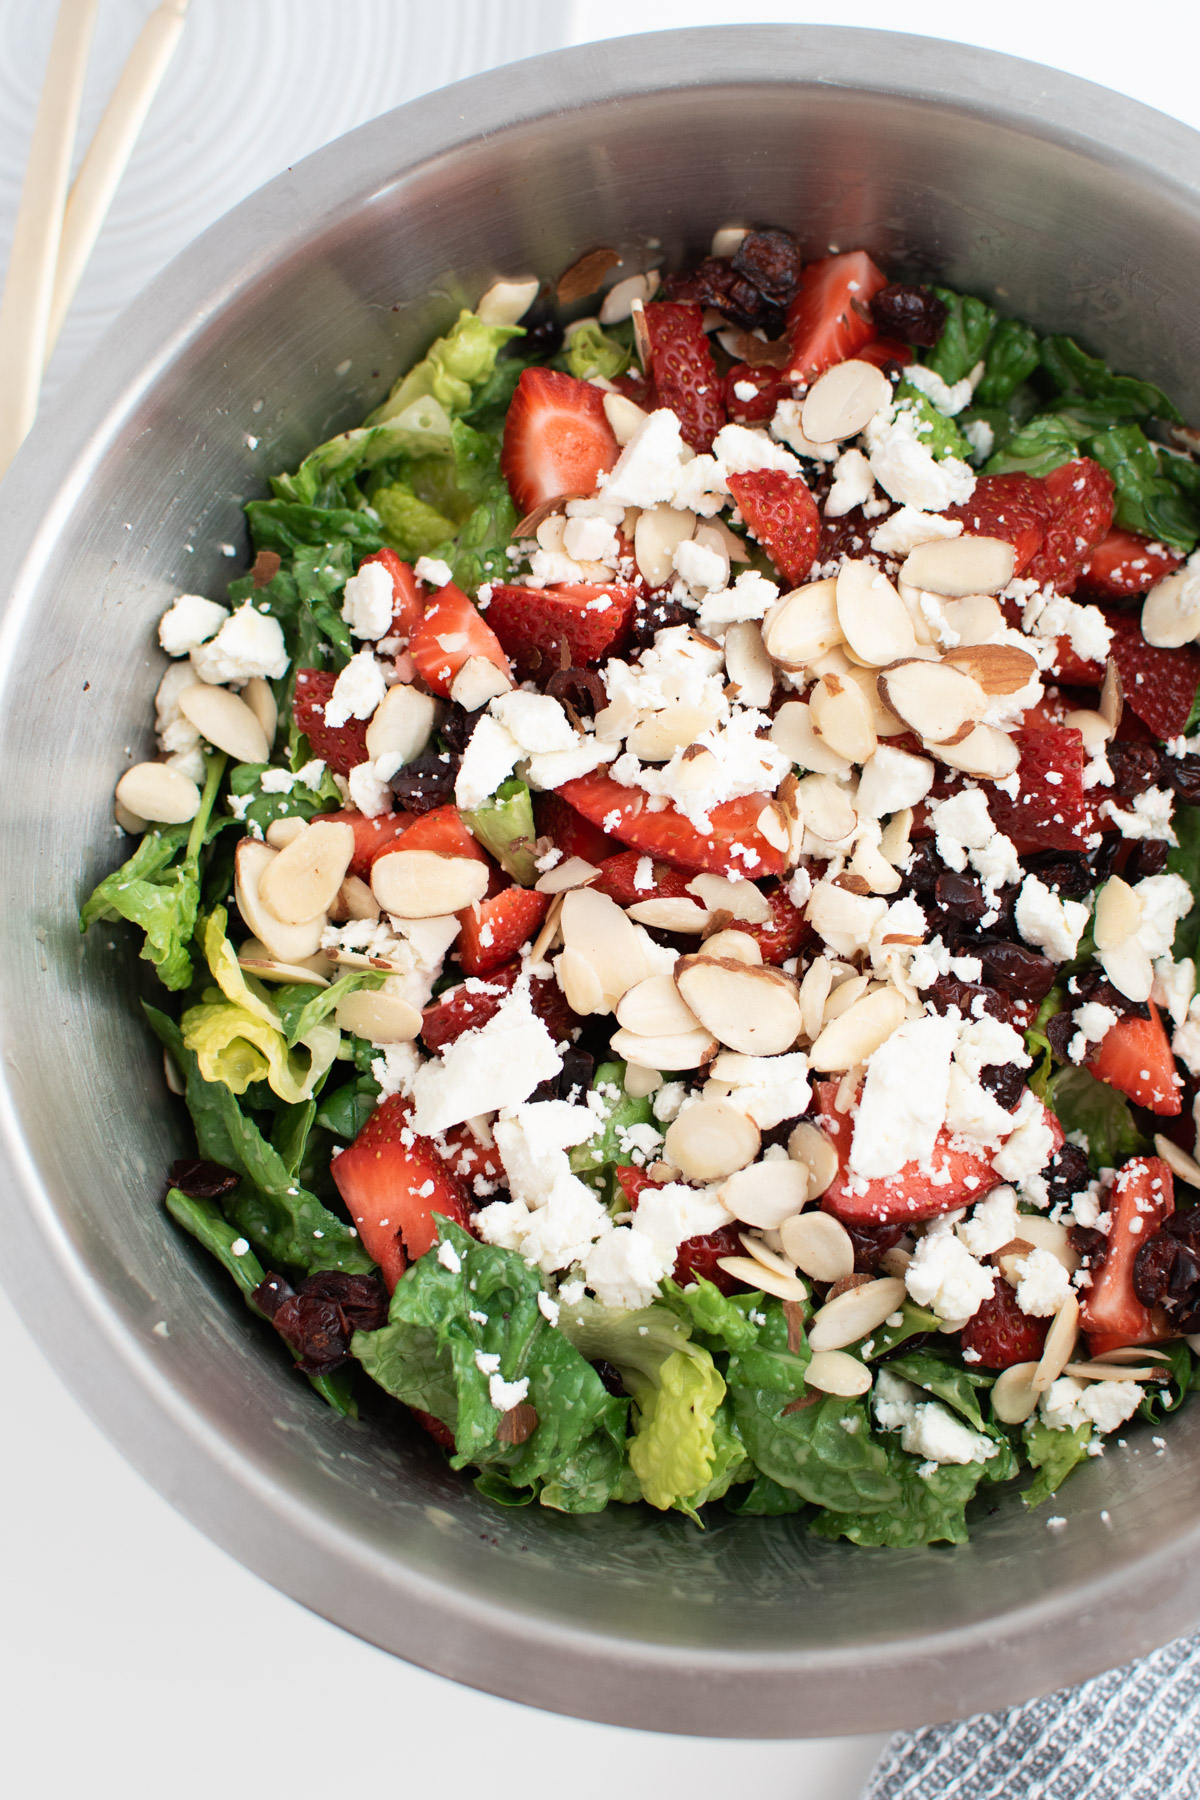 Large mixing bowl filled with spinach strawberry almond salad with feta cheese.